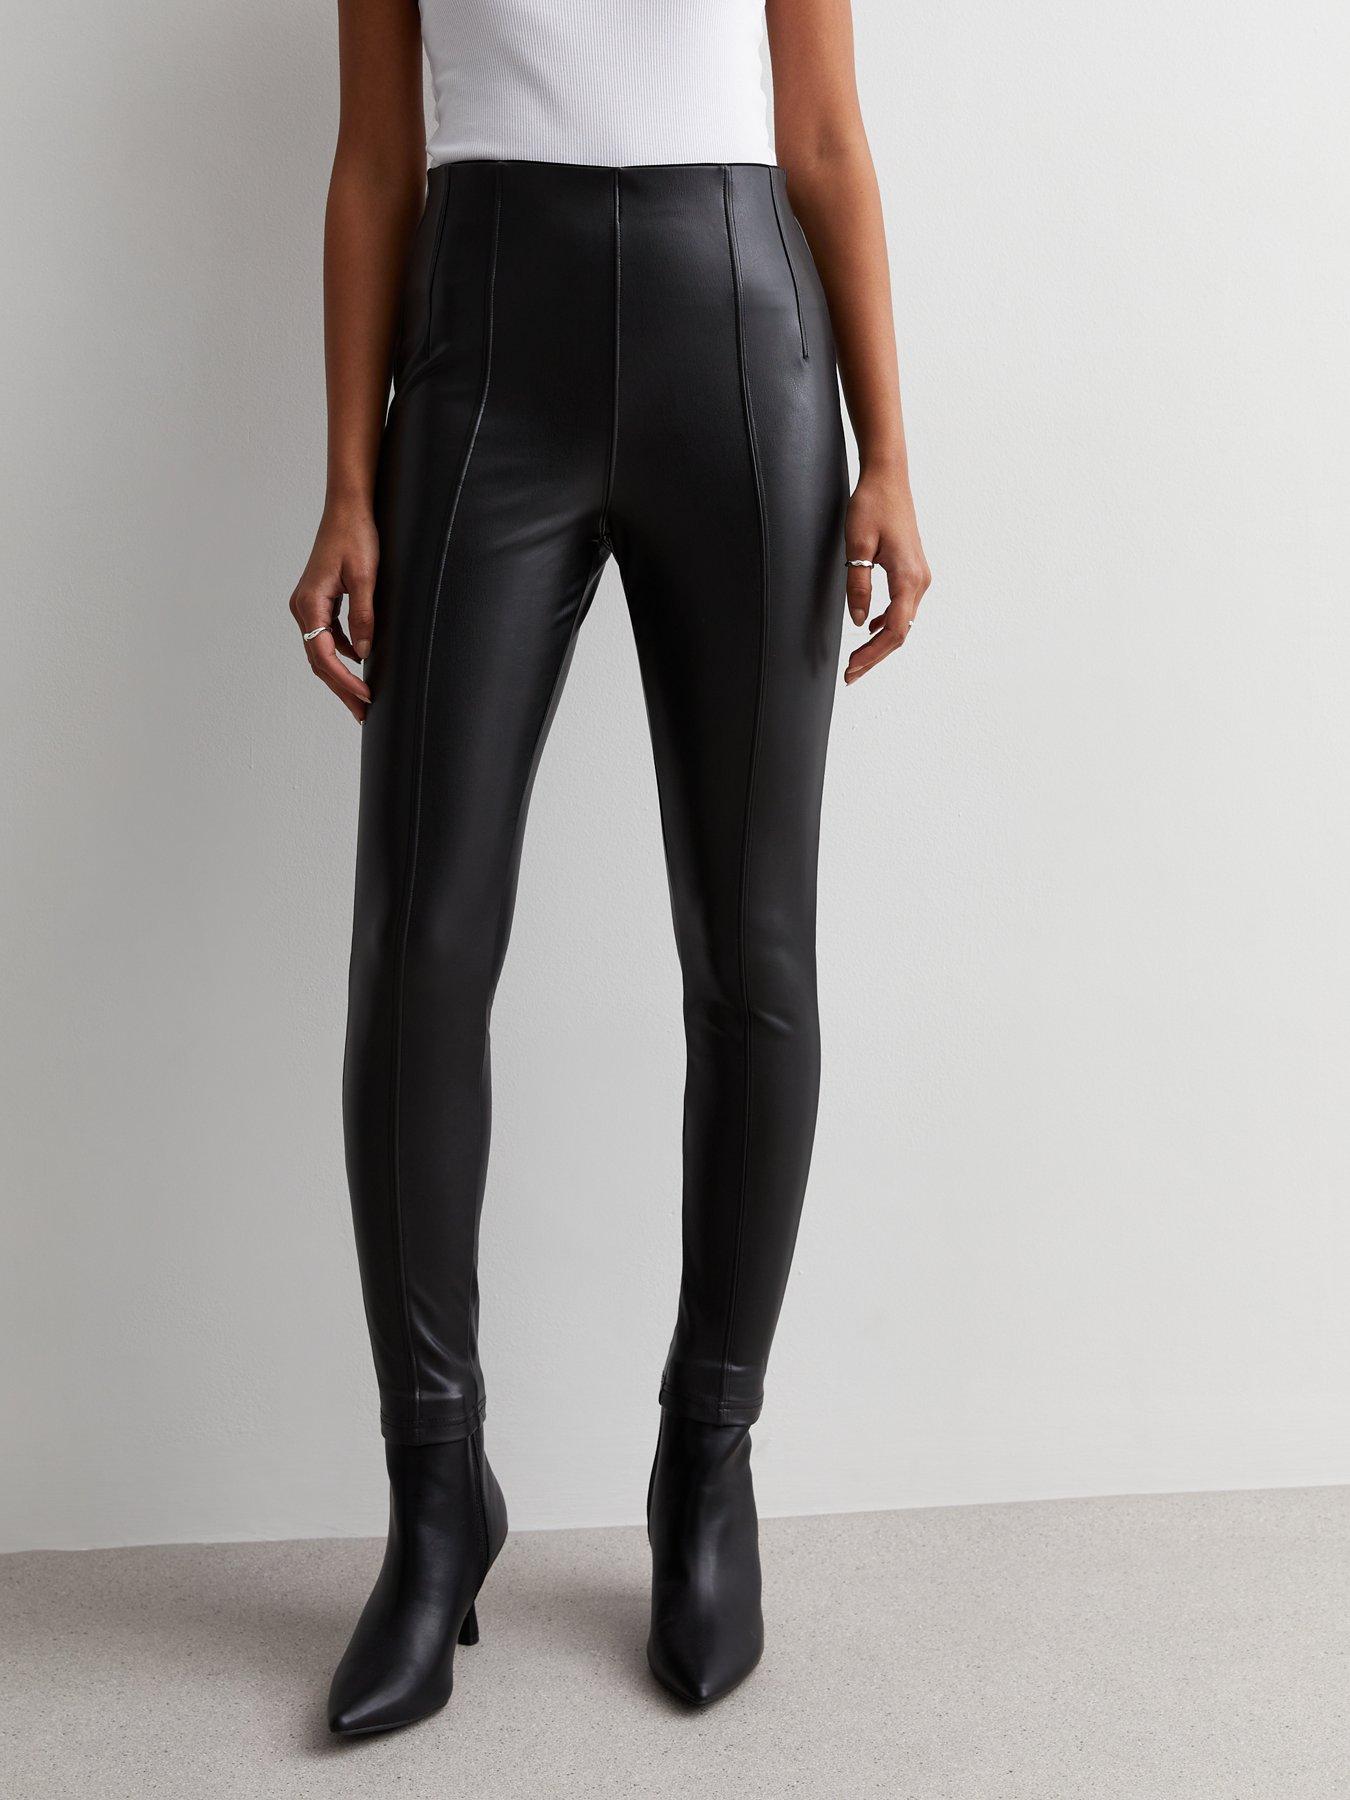 NEW LOOK Tall Black Leather-Look Leggings New Look for Women